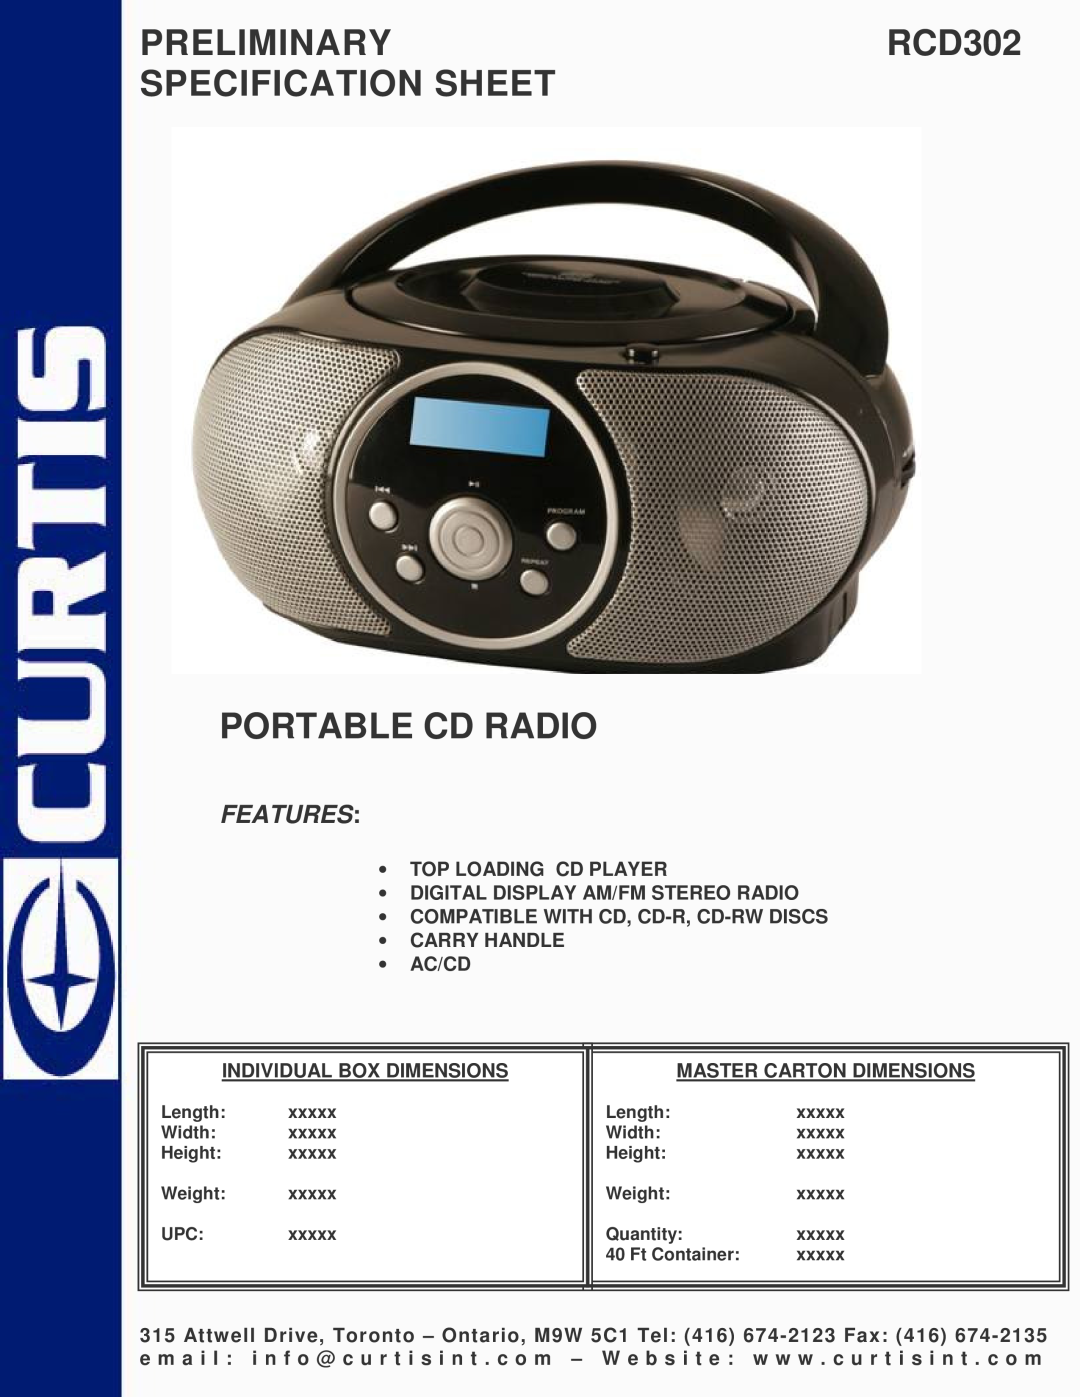 Curtis specifications PRELIMINARYRCD302 SPECIFICATION SHEET, Portable Cd Radio, Features 